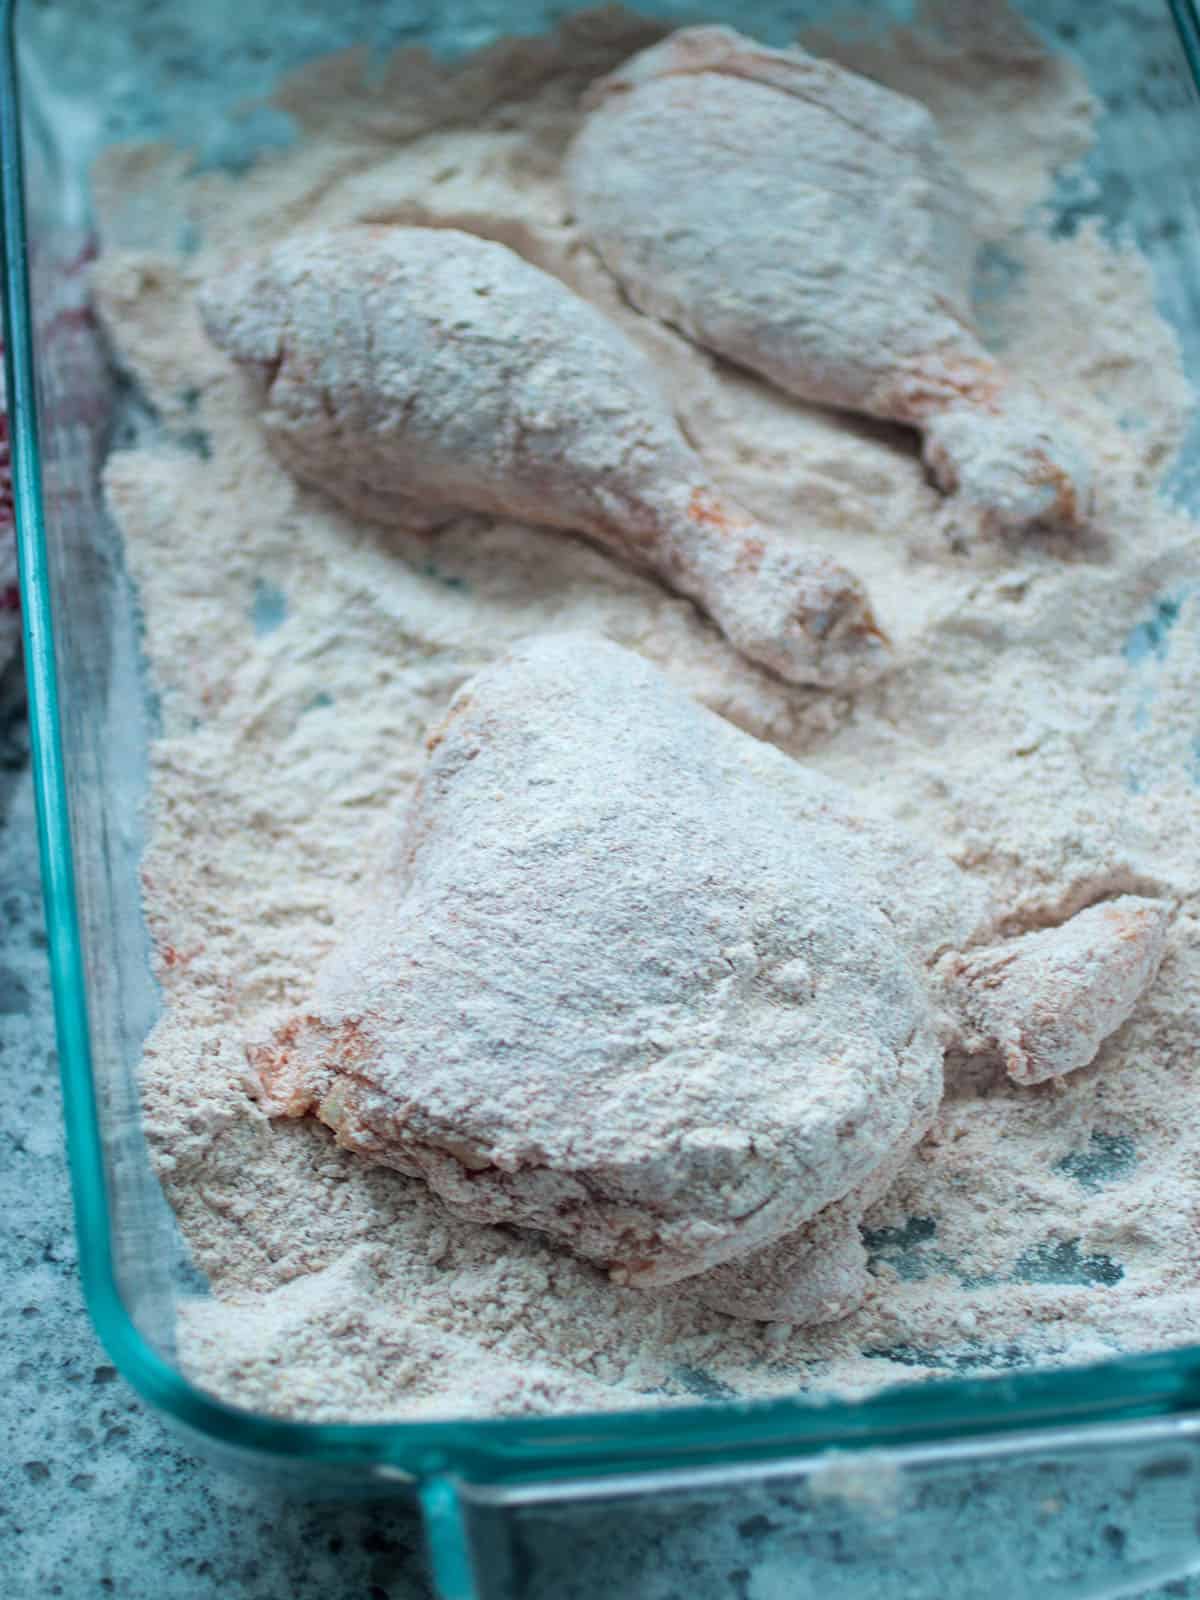 Coating the chicken with the flour seasoning mix.